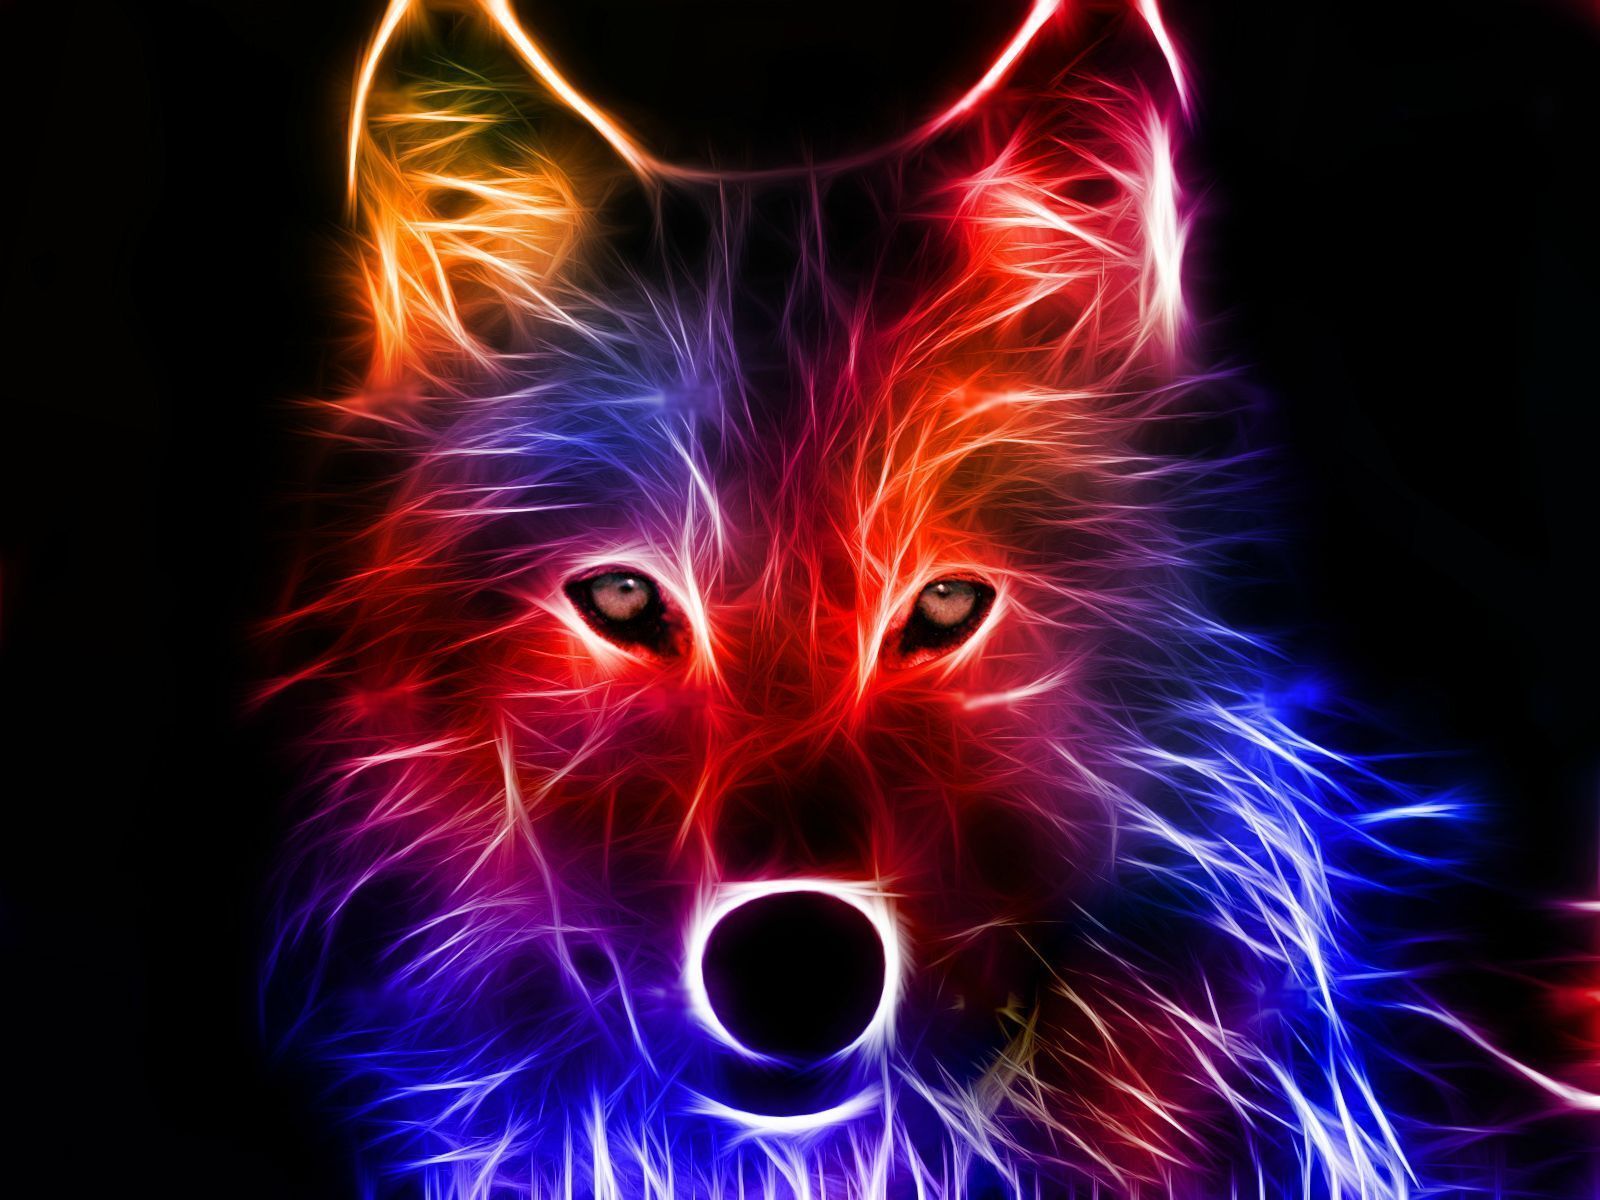 100+] Fire And Ice Wolf Wallpapers